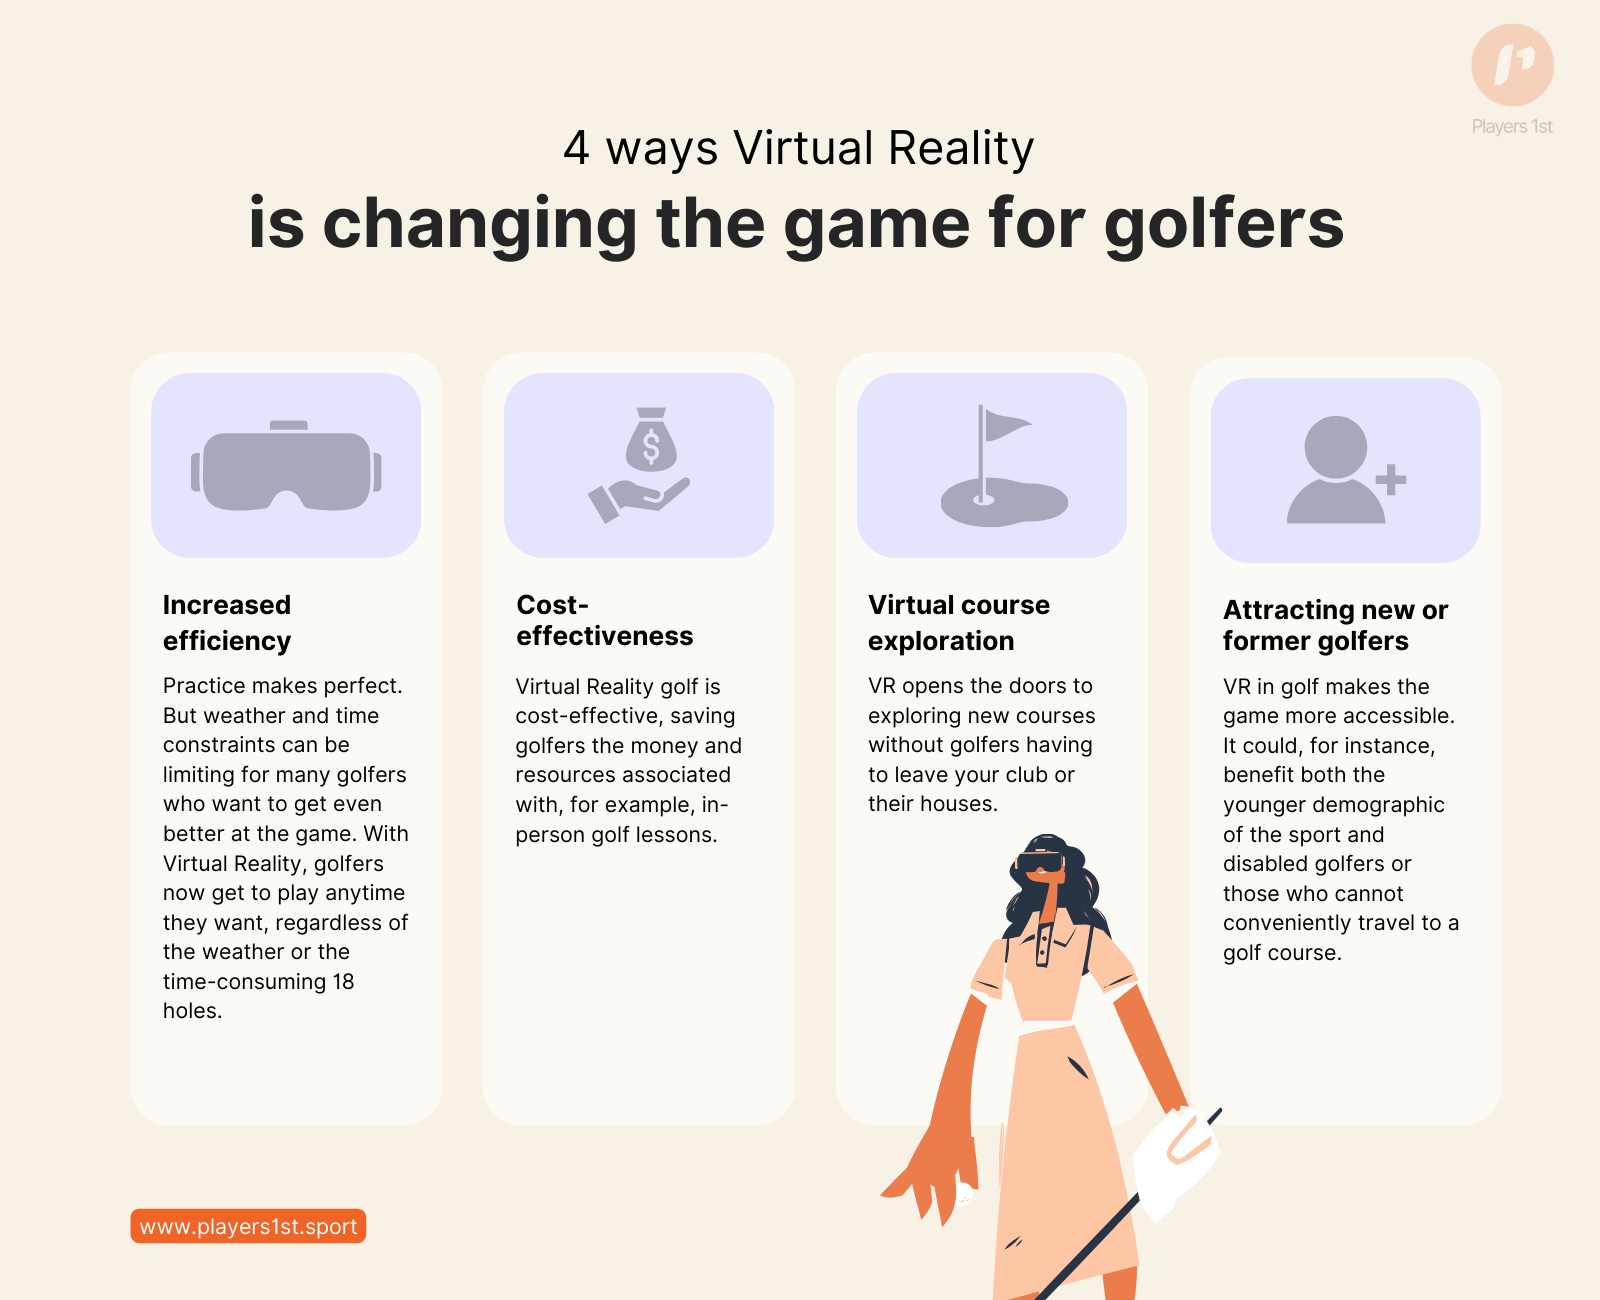 Figure 1: Virtual Reality opens digital doors for golfers to explore